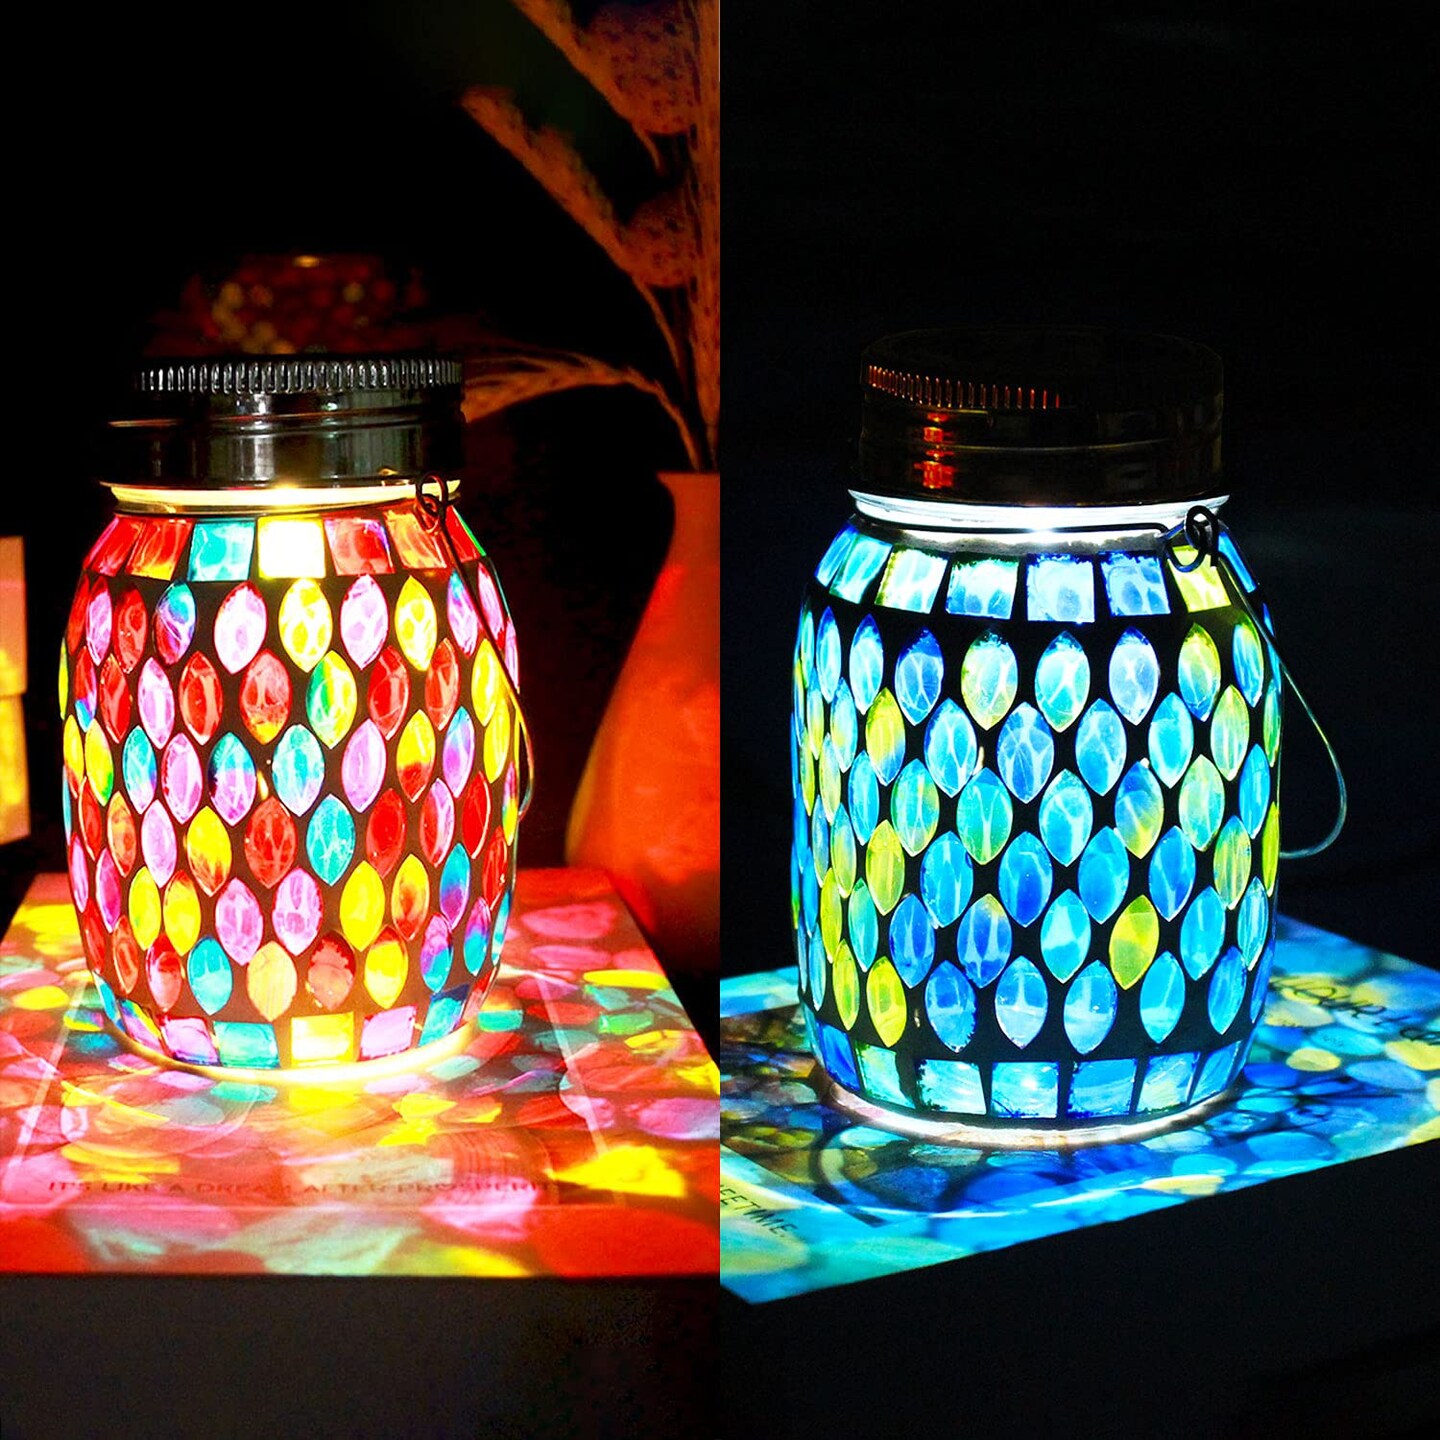 Mosaic Solar Lanterns Outdoor Hanging Lights, Solar Table Lamps &#x26; Cool Blue Color Mosaic Glass Lights, Outdoor Waterproof Solar Night Lights, Garden,Patio,Pathway &#x26; Yard D&#xE9;cor